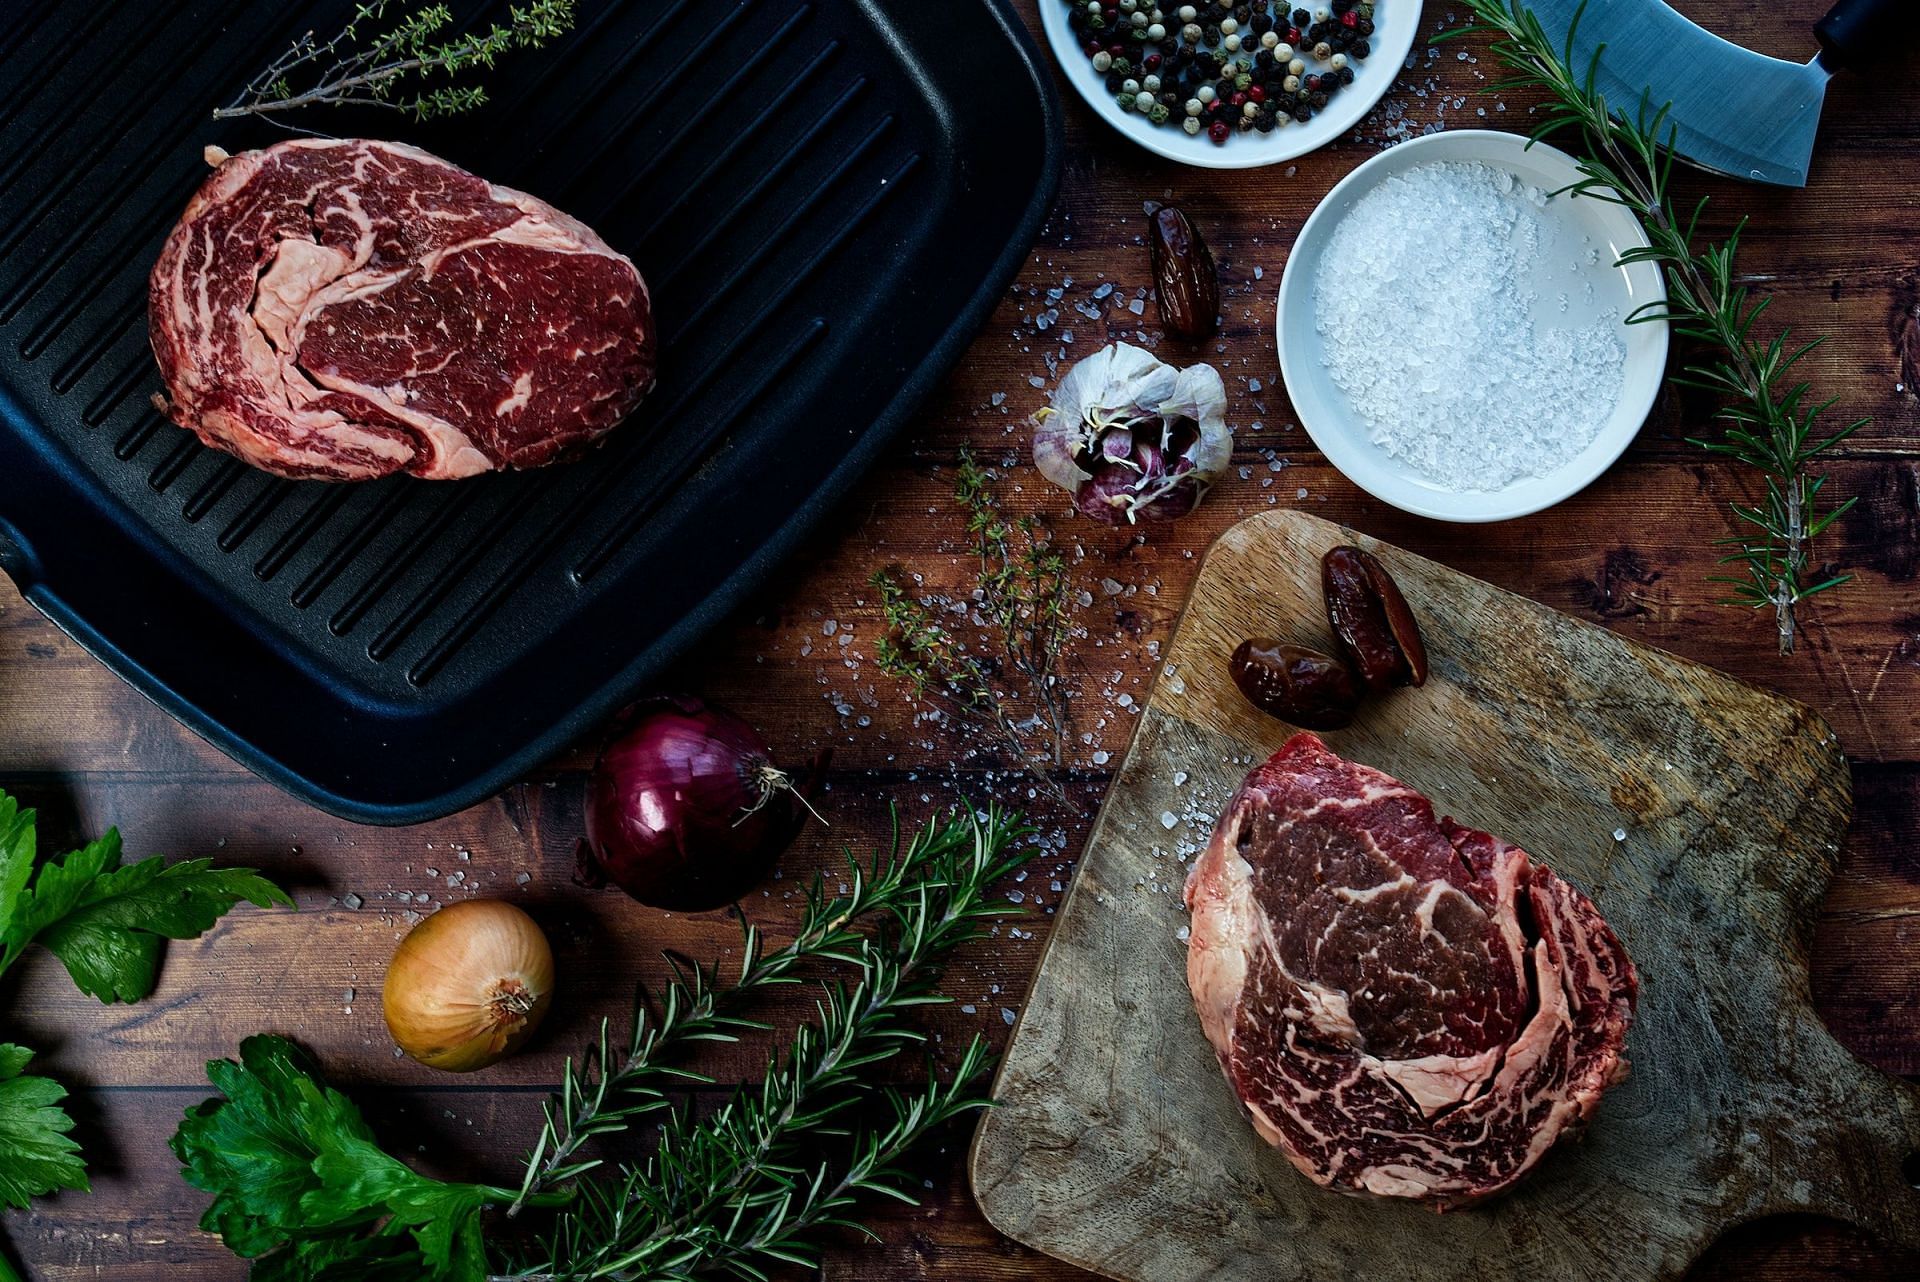 Beef contains several vitamins and minerals. (Image via Unsplash/KTRYNA)